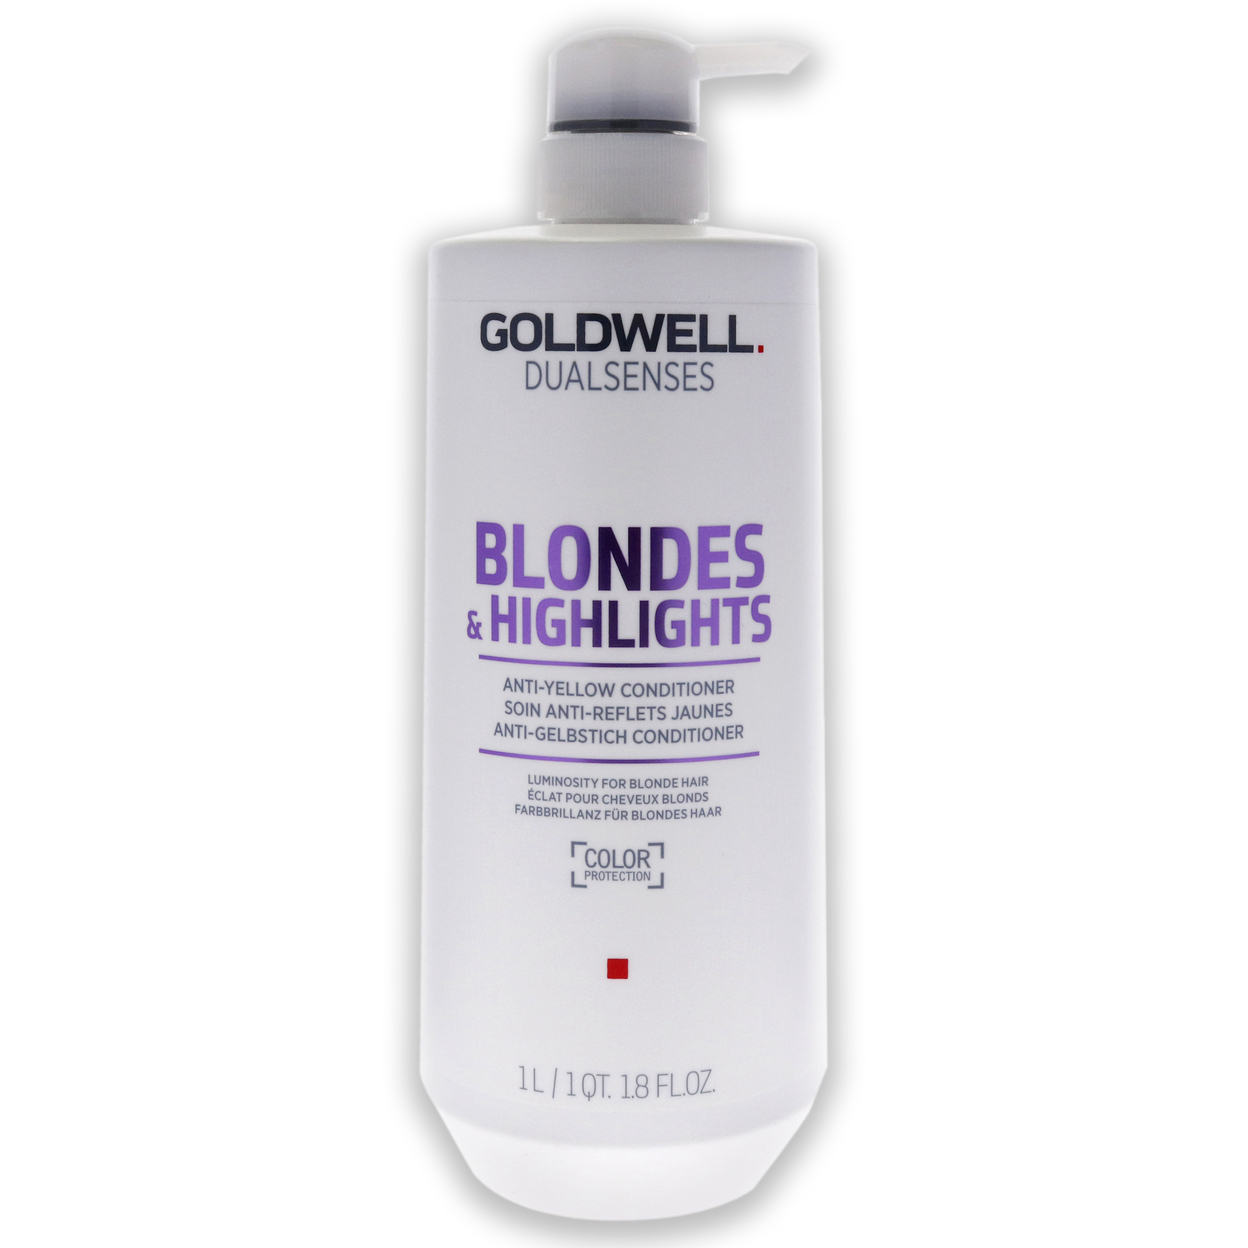 Goldwell Unisex HAIRCARE Dualsenses Blondes And Highlights Conditioner 34 Oz